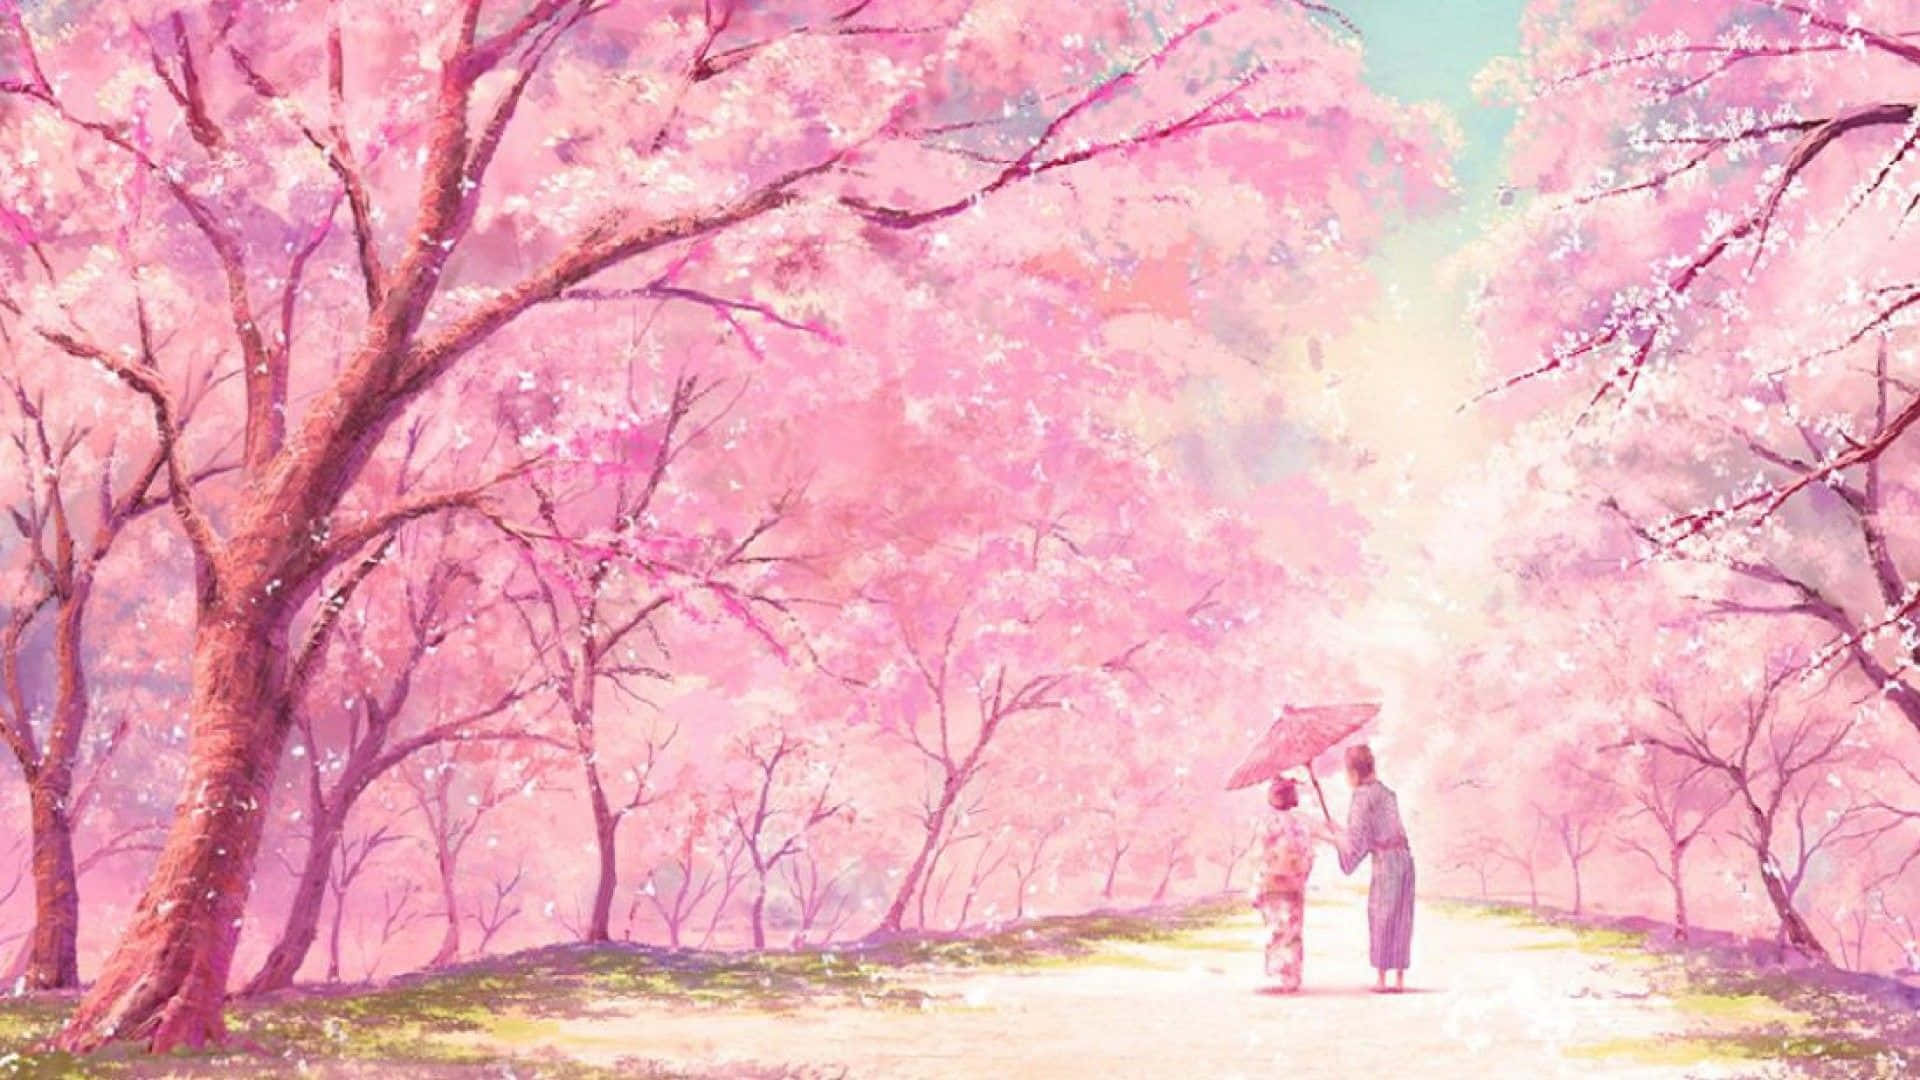 A Painting Of A Couple Walking Through A Pink Tree